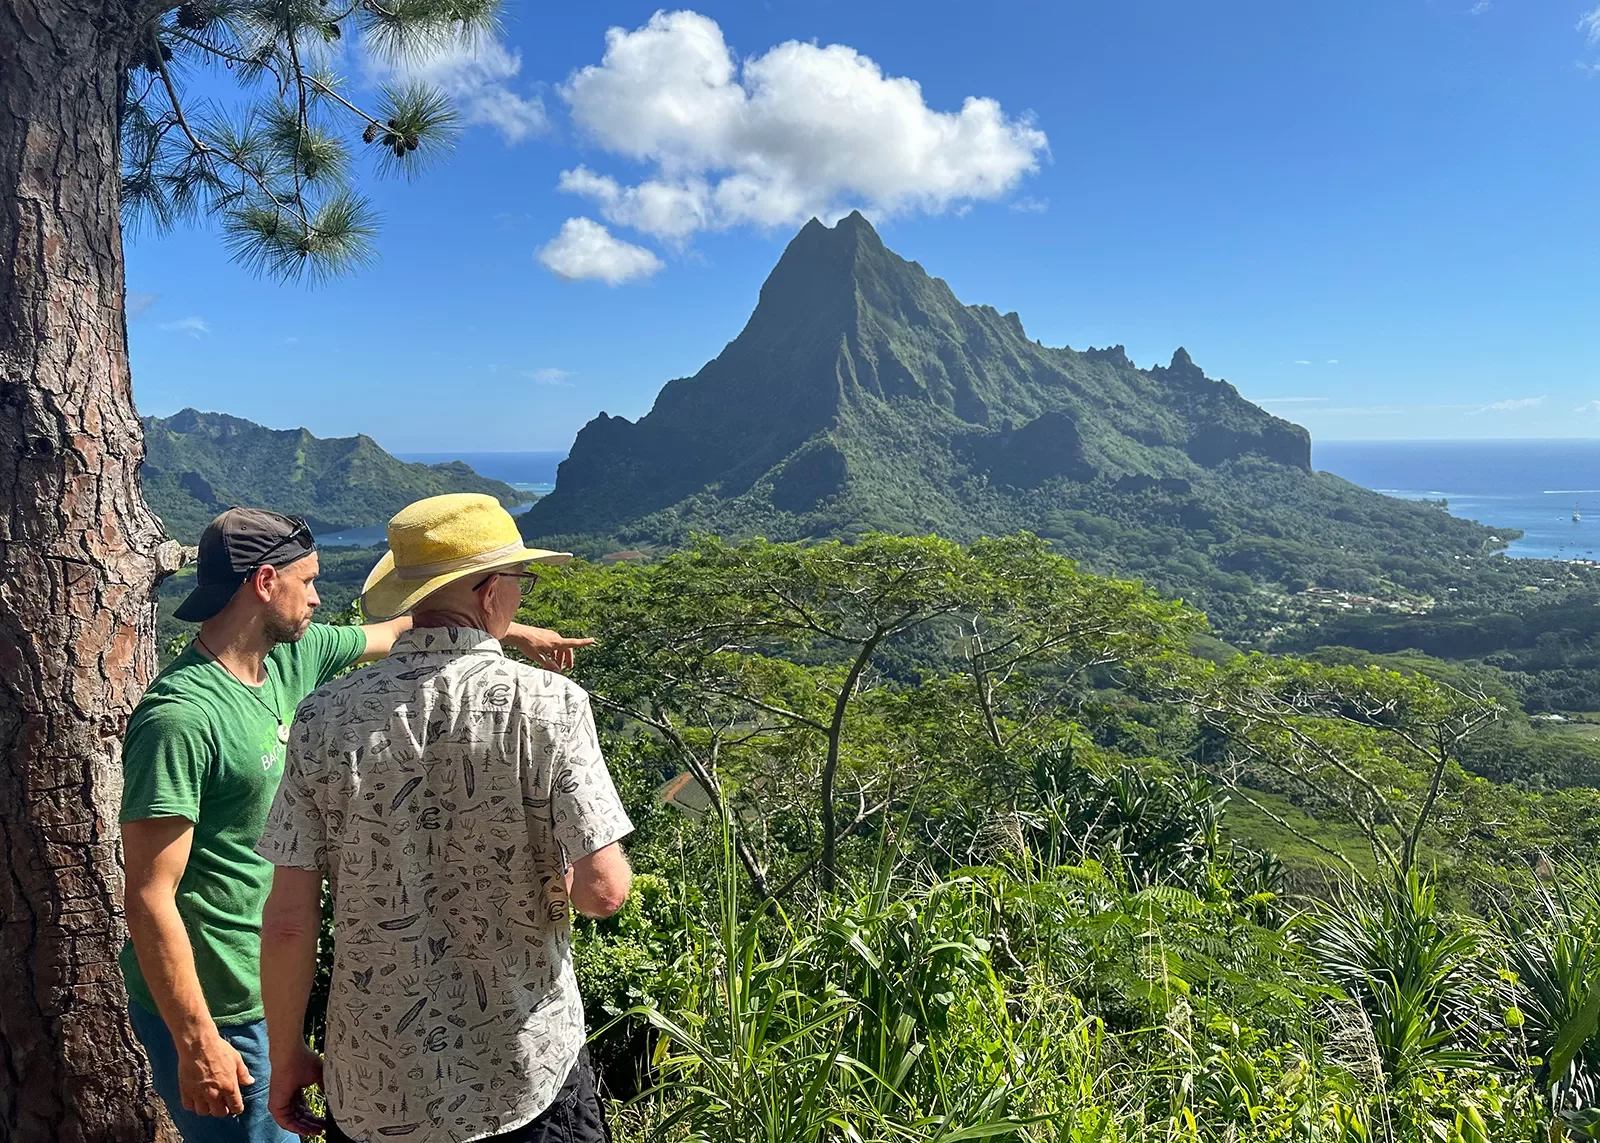 Looking out over mountains and jungles in Tahiti